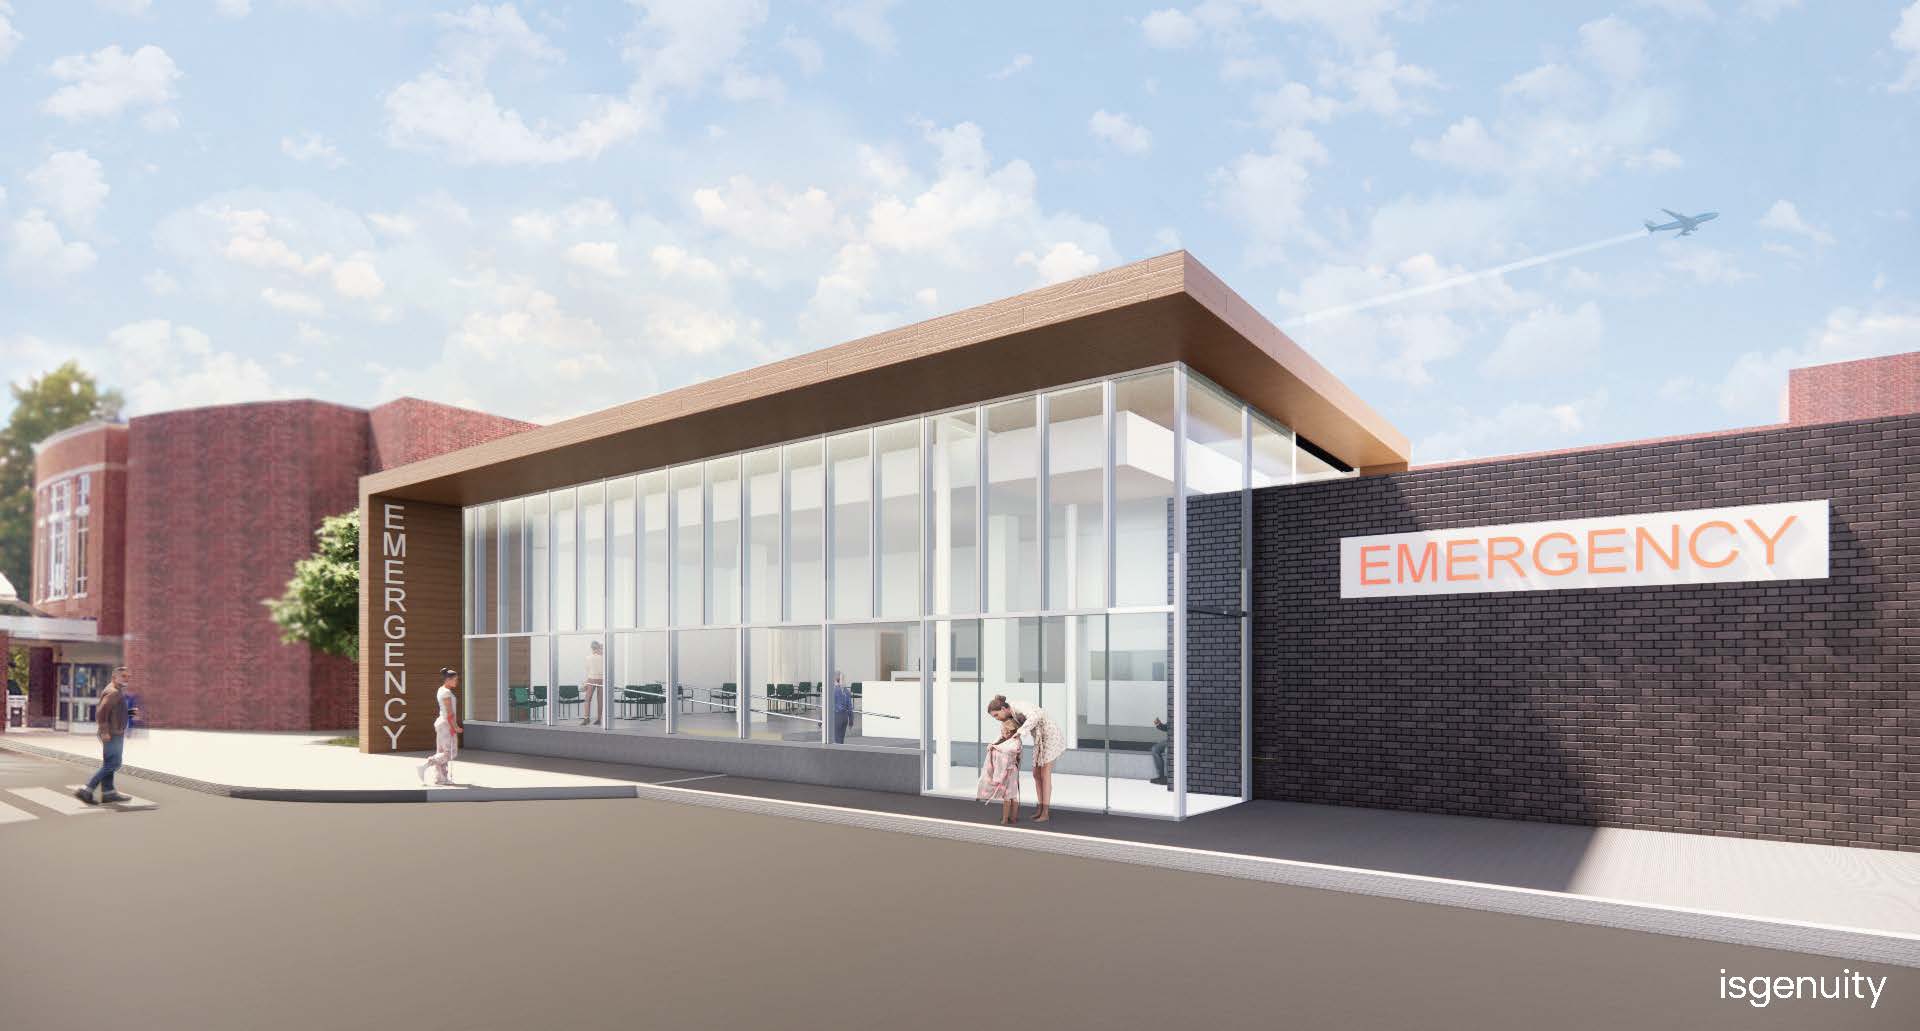 Rendering of new Cooley Dickinson Emergency Department exterior by isgenuity